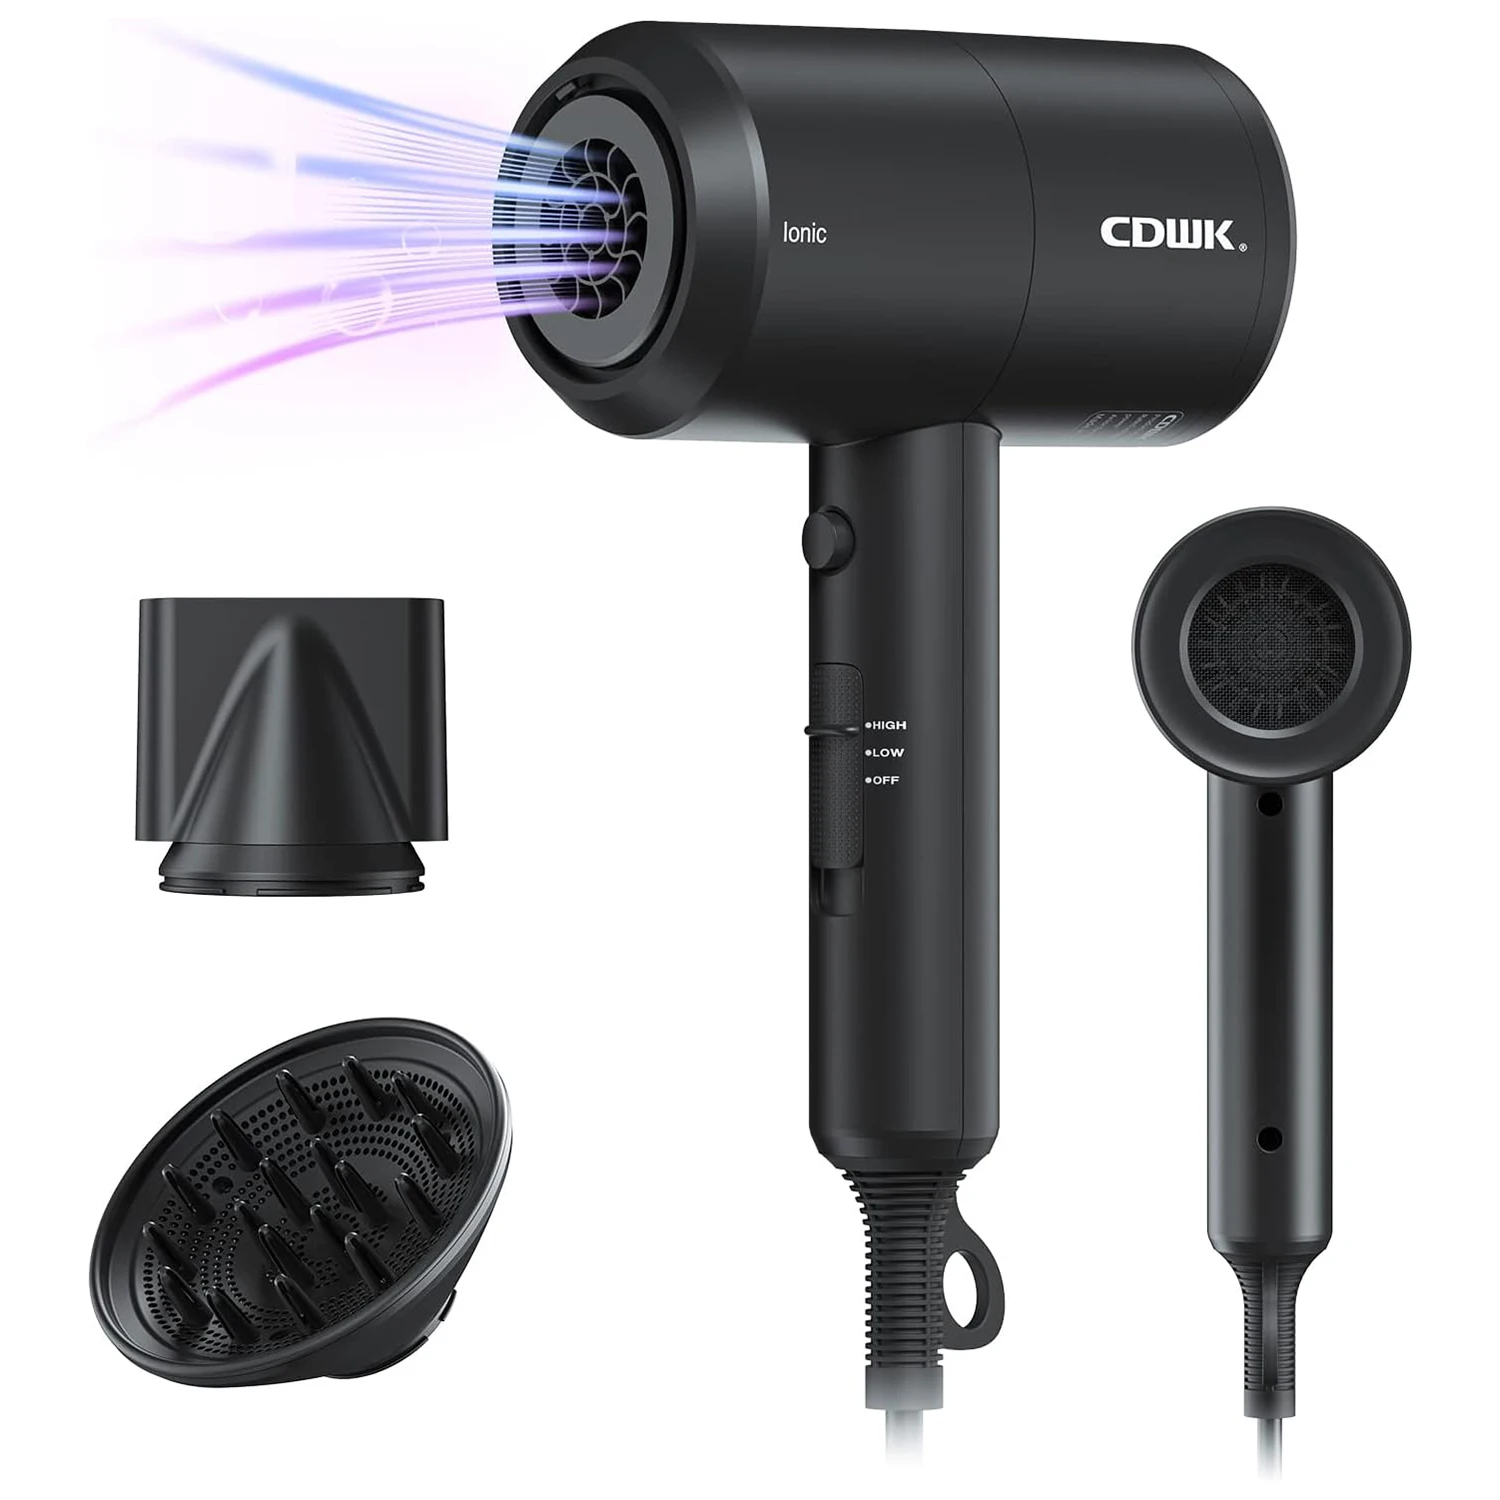 Professional Ionic Negative Hair Dryer with Diffuser 1800W Fast Drying Hair Dryers for Curly Straight Hair Travel Portable oupes 1800w 1488wh portable power station solar generator with quick charge upgrade lifepo4 battery for camping hiking hunting